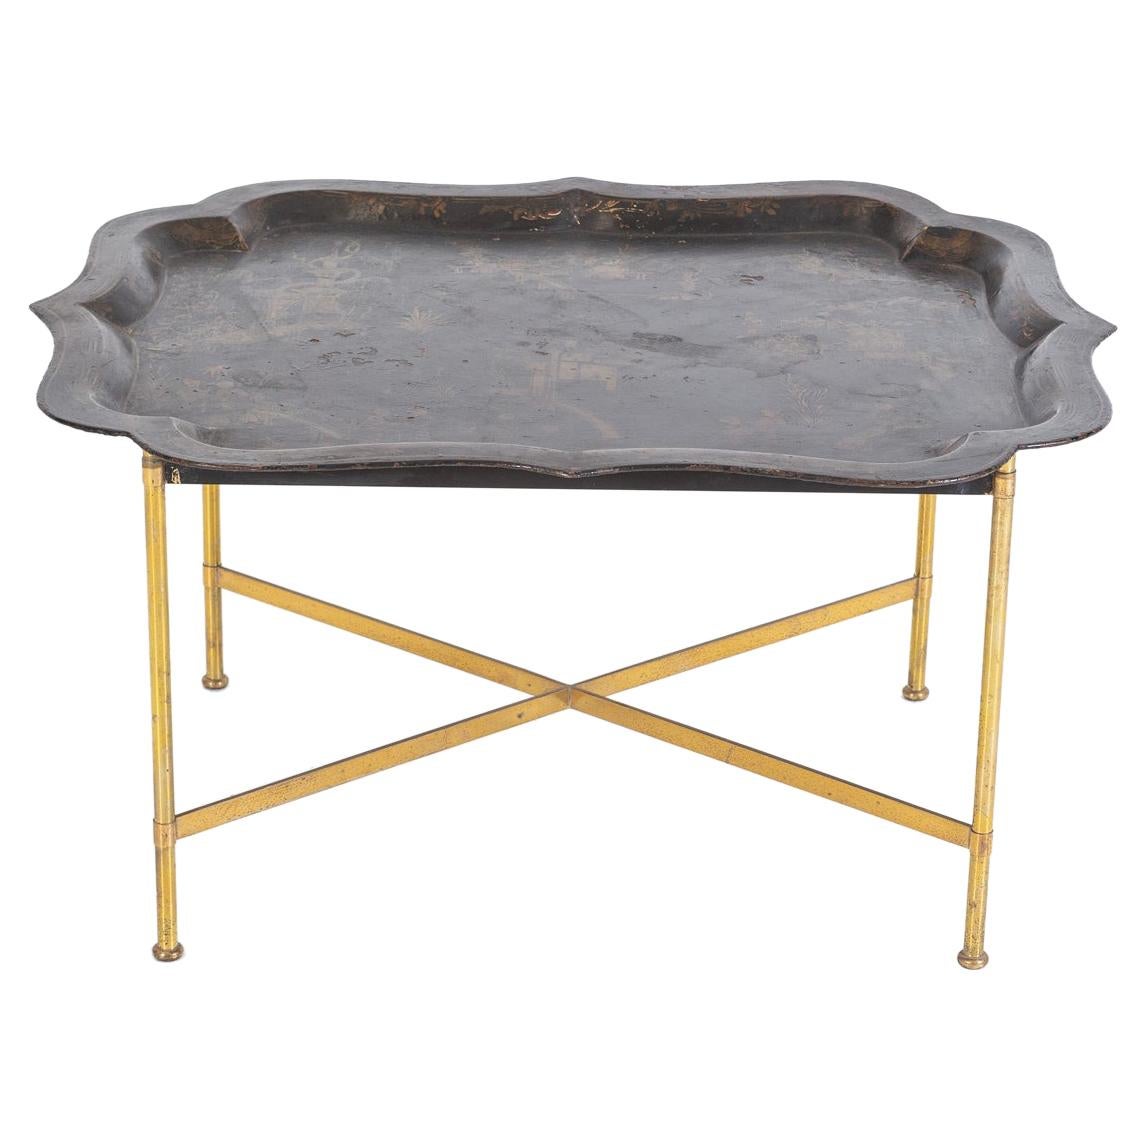 19thC Large Regency Chinoiserie Toleware Tray Table